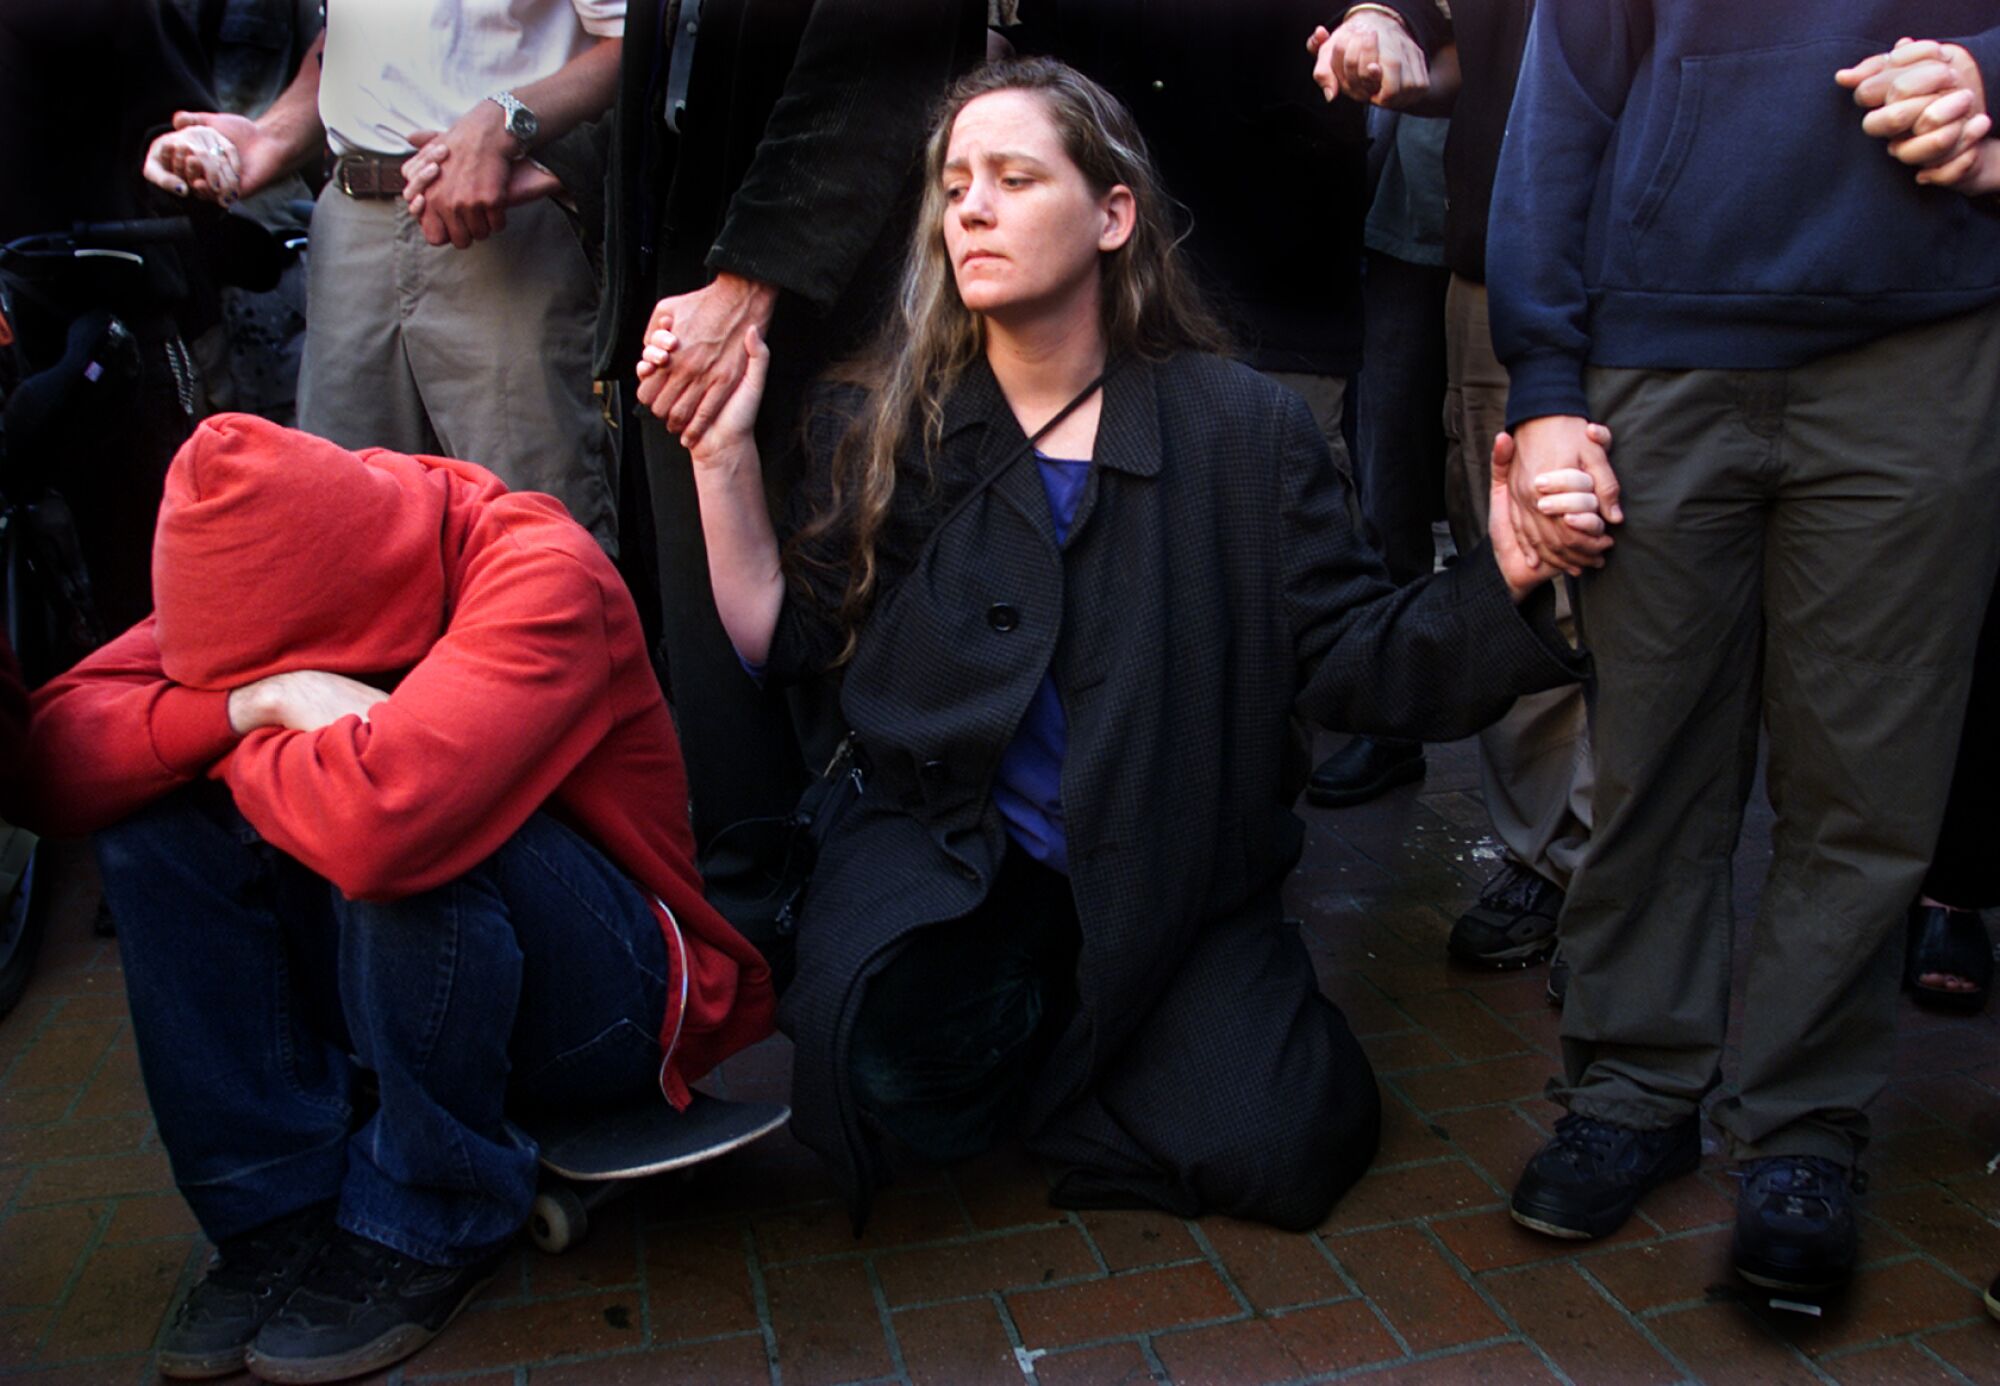 A group of people join hands, including a kneeling woman